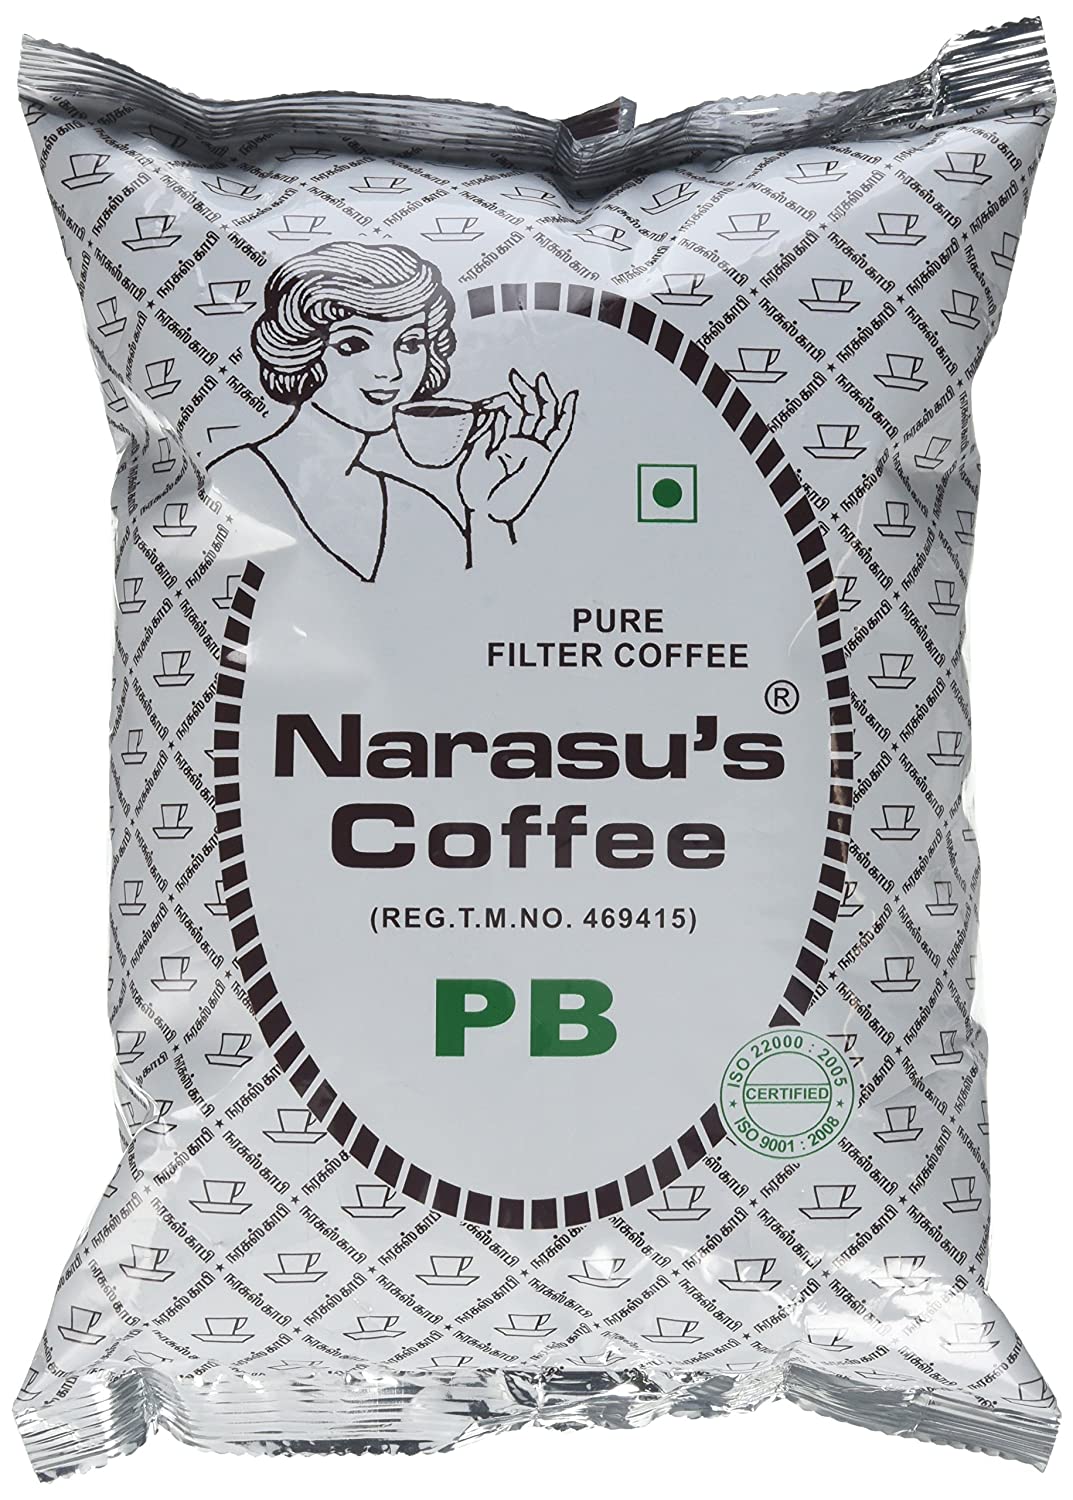 Pure Filter Coffee